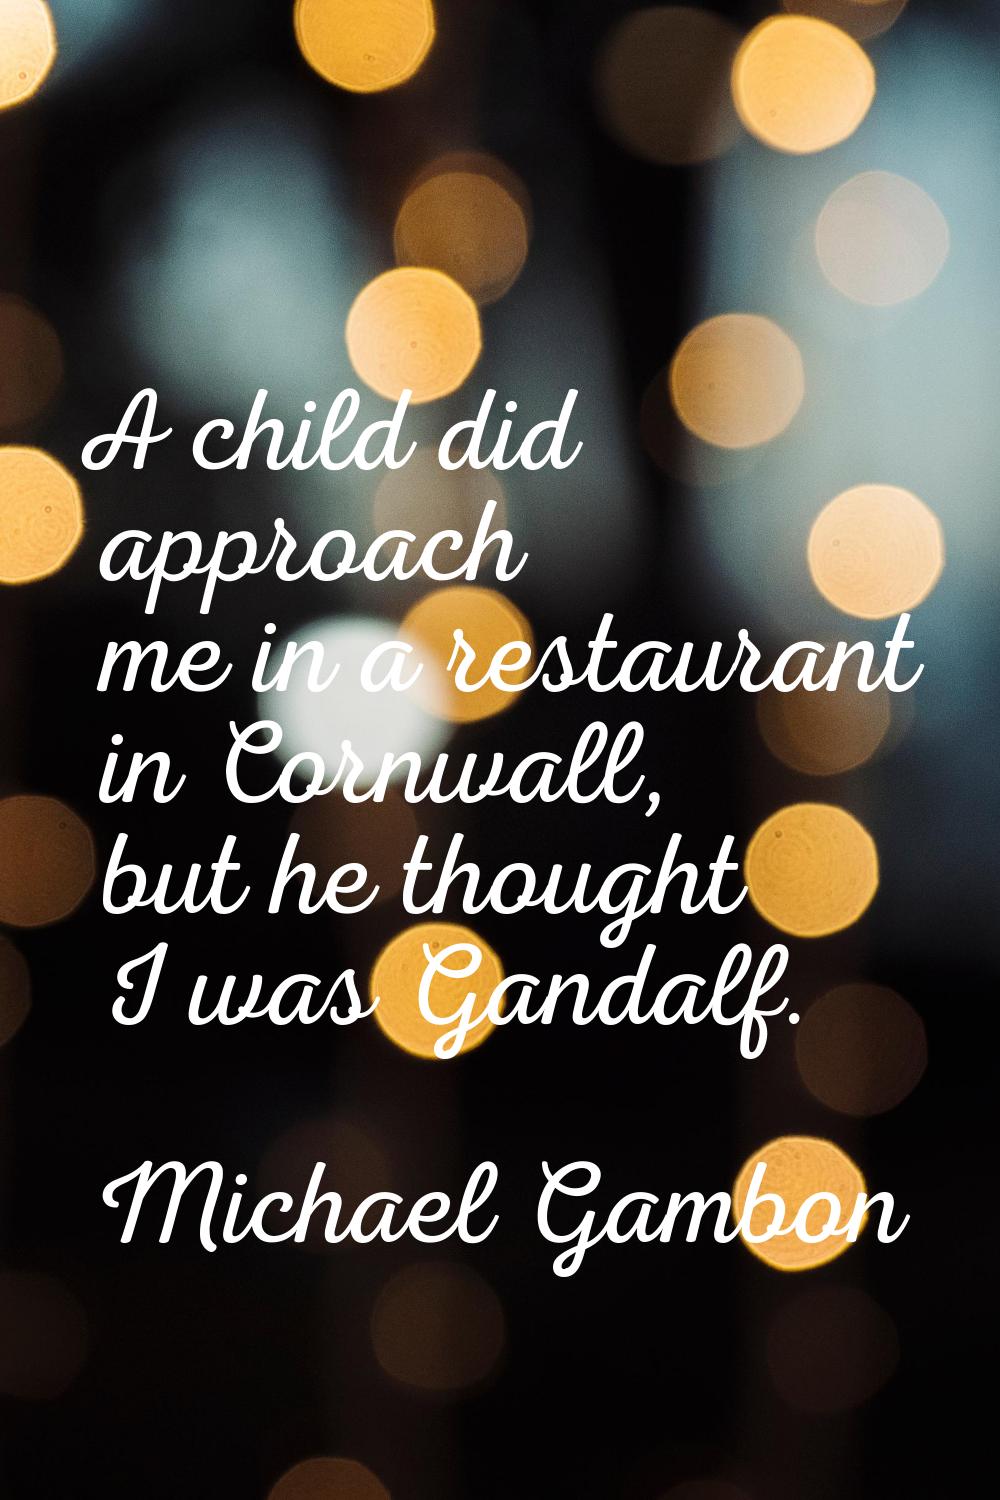 A child did approach me in a restaurant in Cornwall, but he thought I was Gandalf.